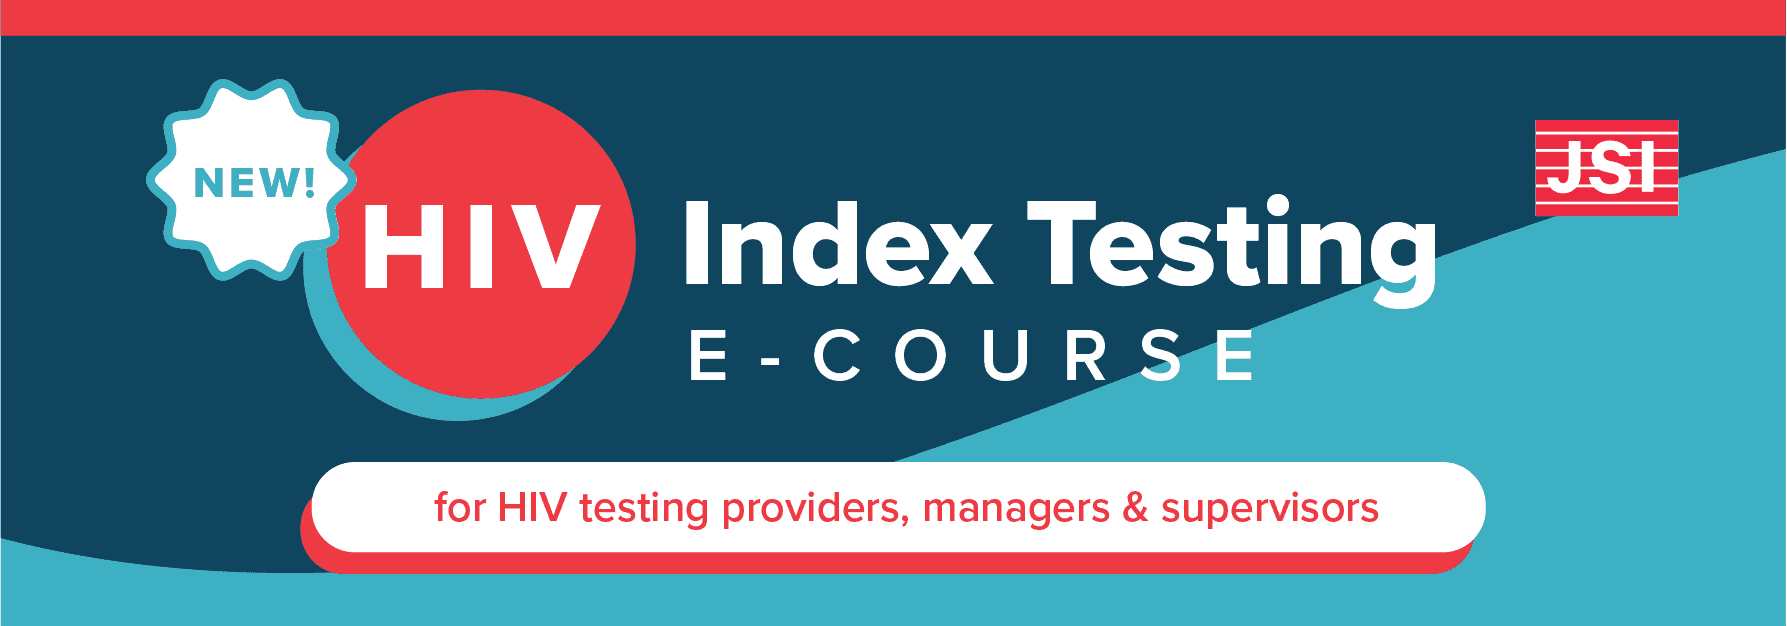 New Online Course on Partner and Family-Based Index Testing for HIV